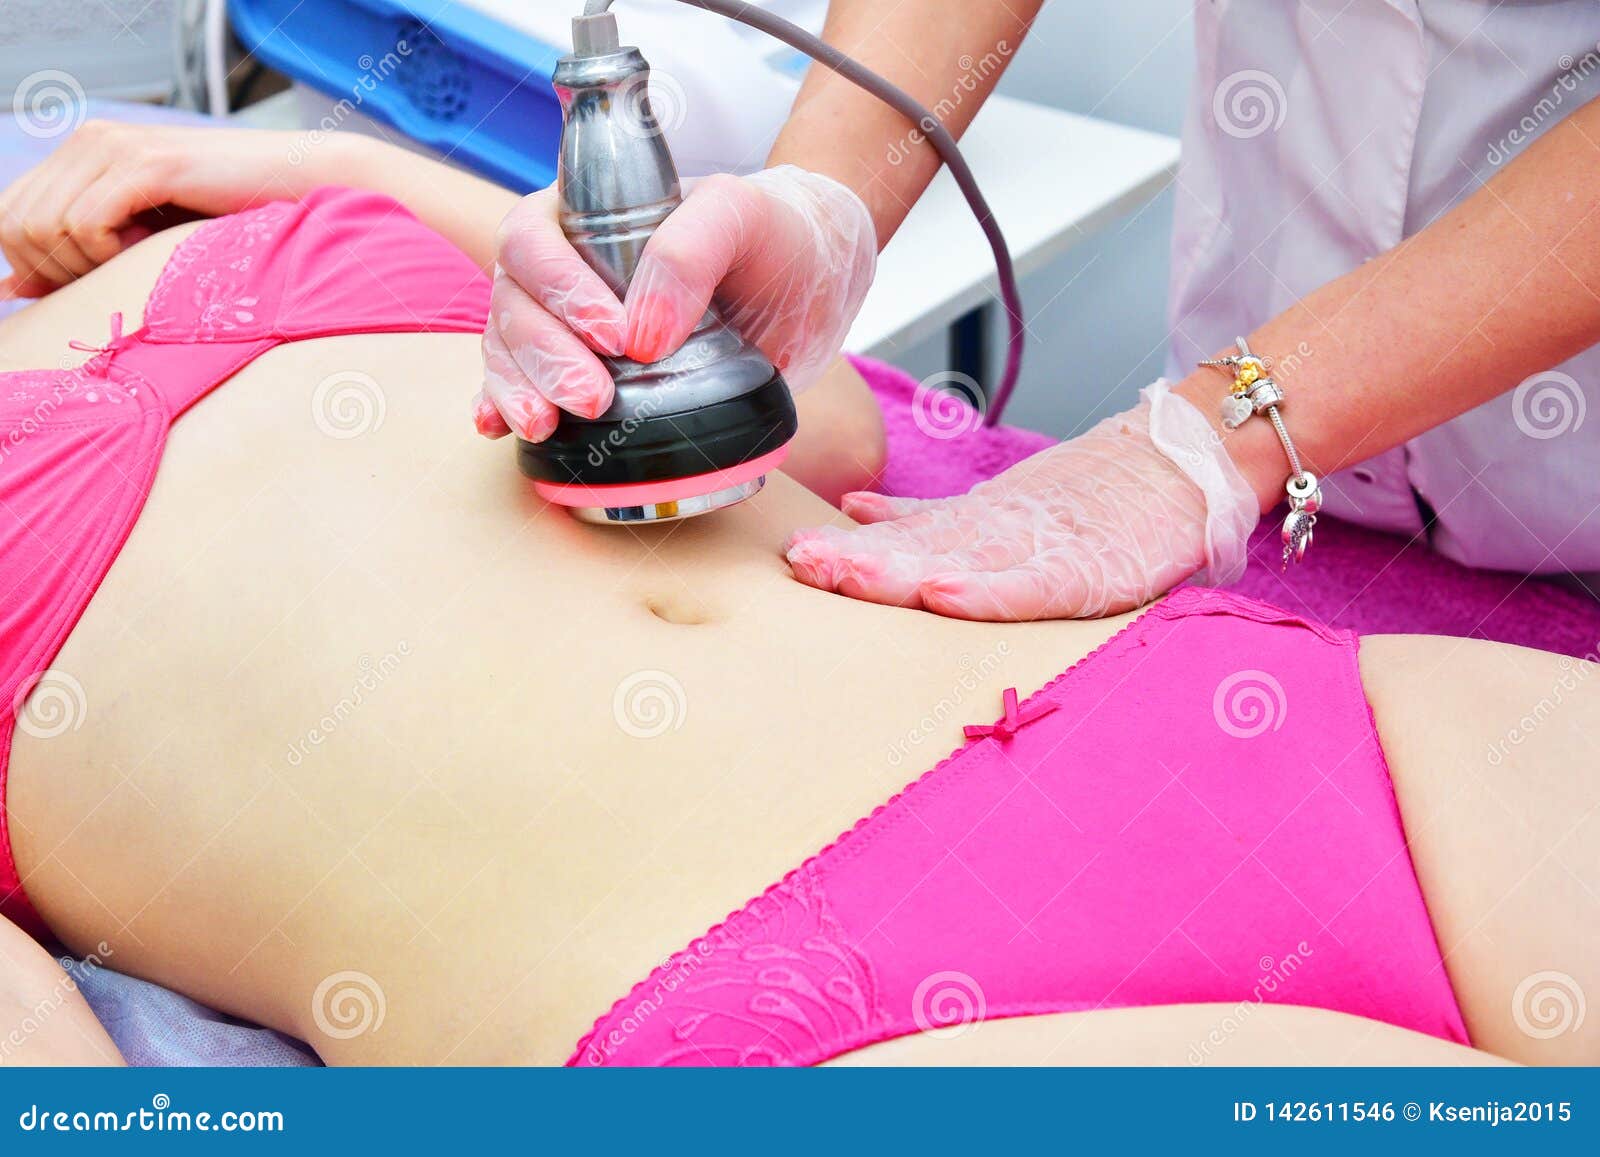 https://thumbs.dreamstime.com/z/rf-skin-tightening-belly-hardware-cosmetology-body-care-non-surgical-body-sculpting-ultrasound-cavitation-body-contouring-tre-rf-142611546.jpg